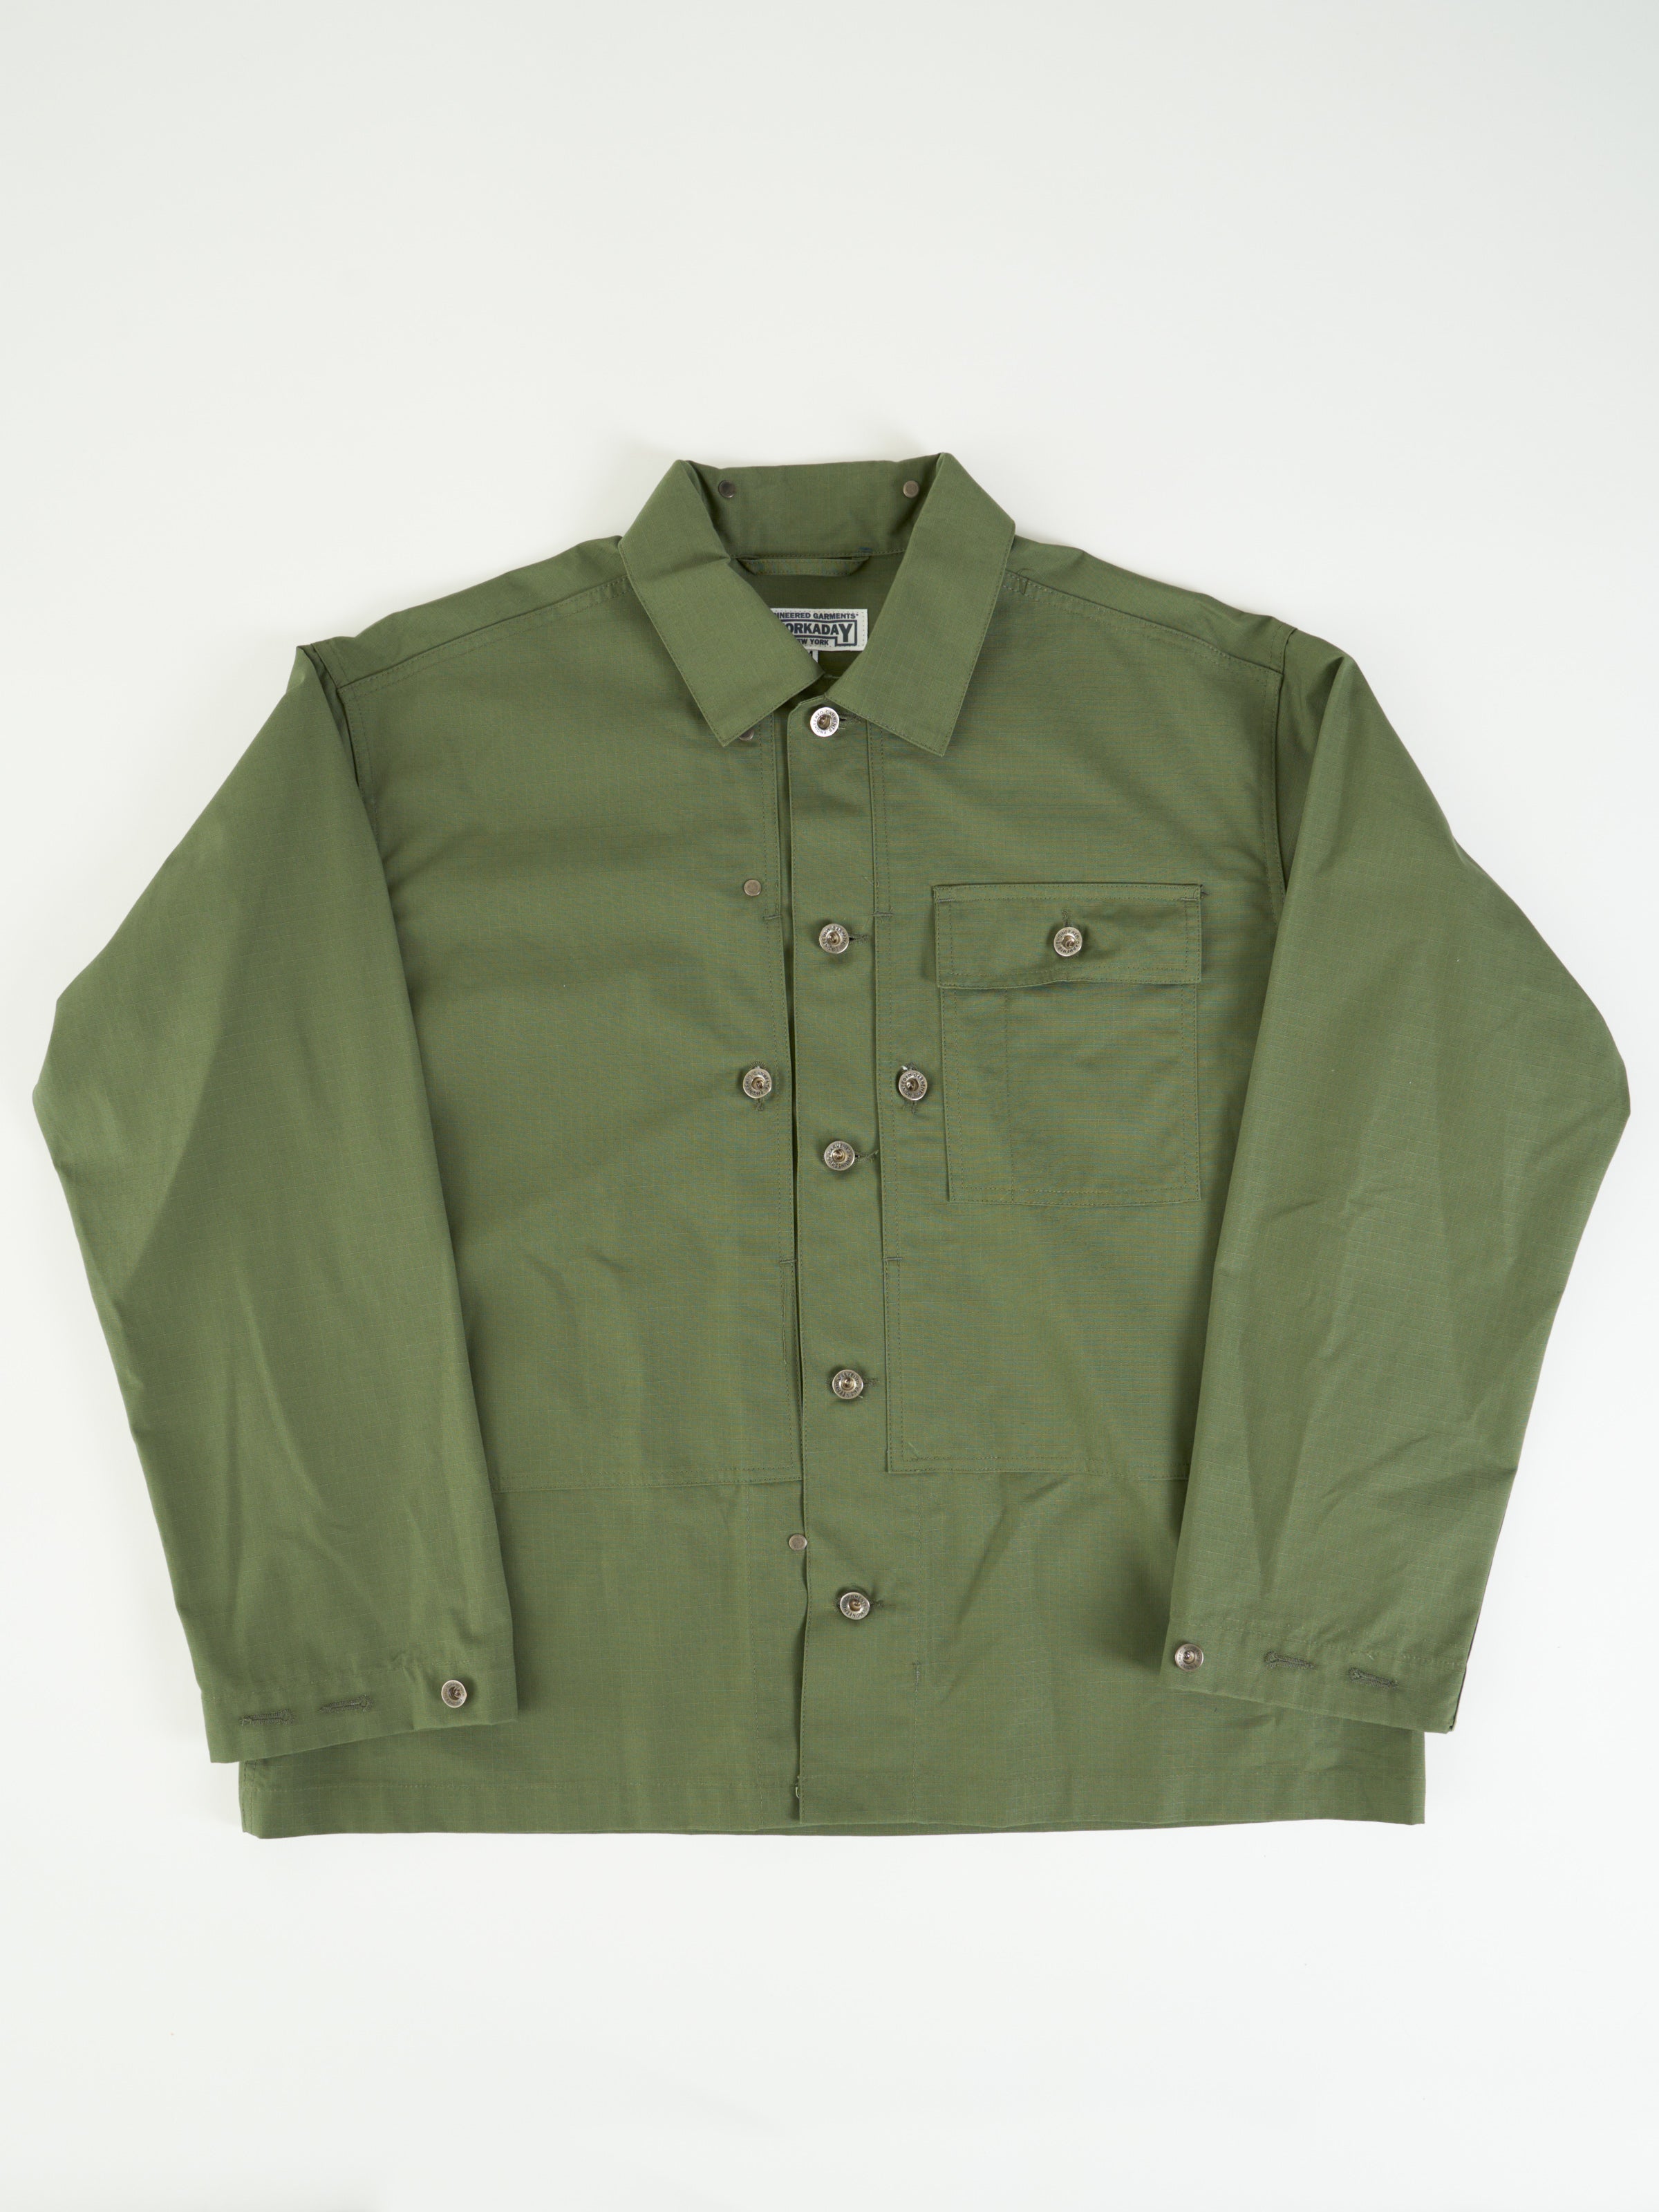 P44 Jacket - Olive Cotton Ripstop